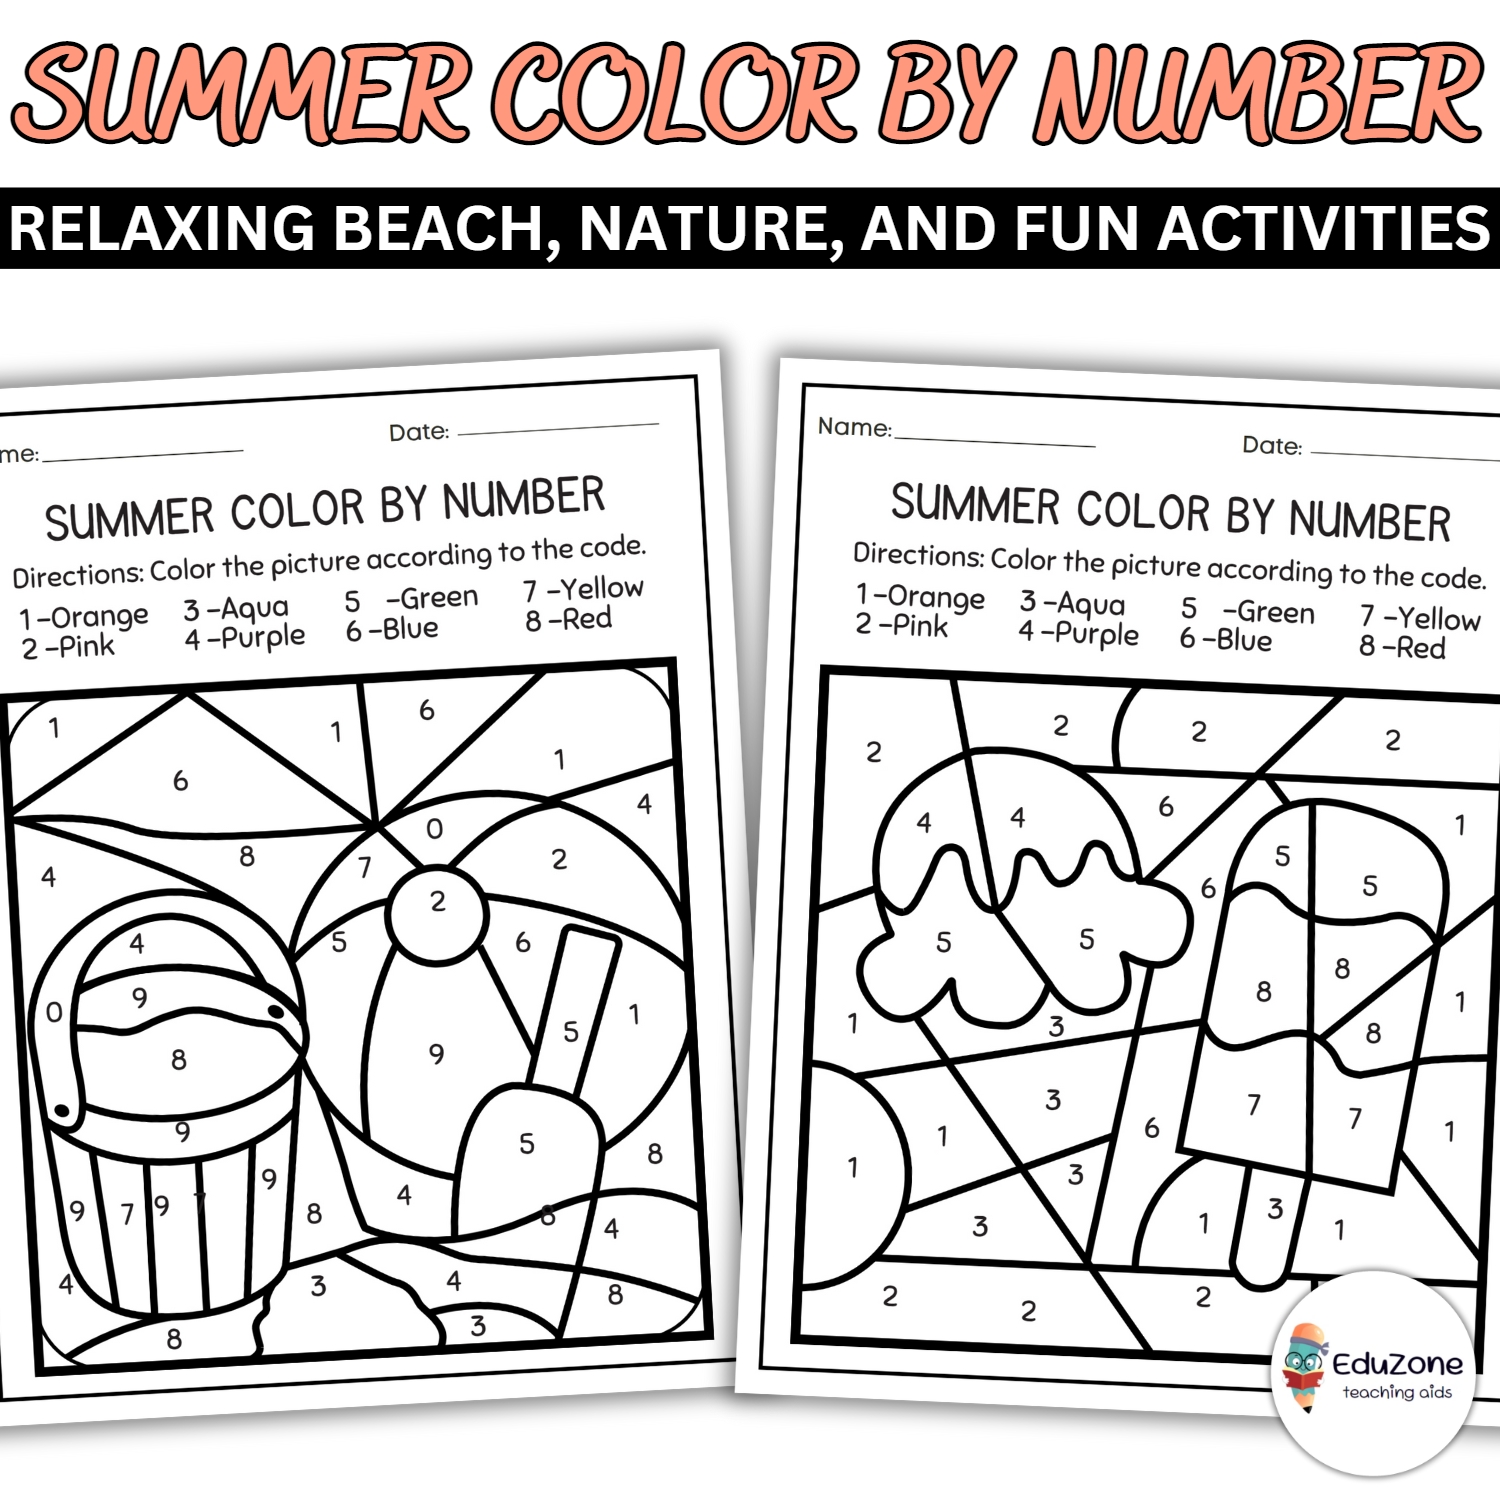 Creative summer color by number relaxing beach nature and fun activities made by teachers